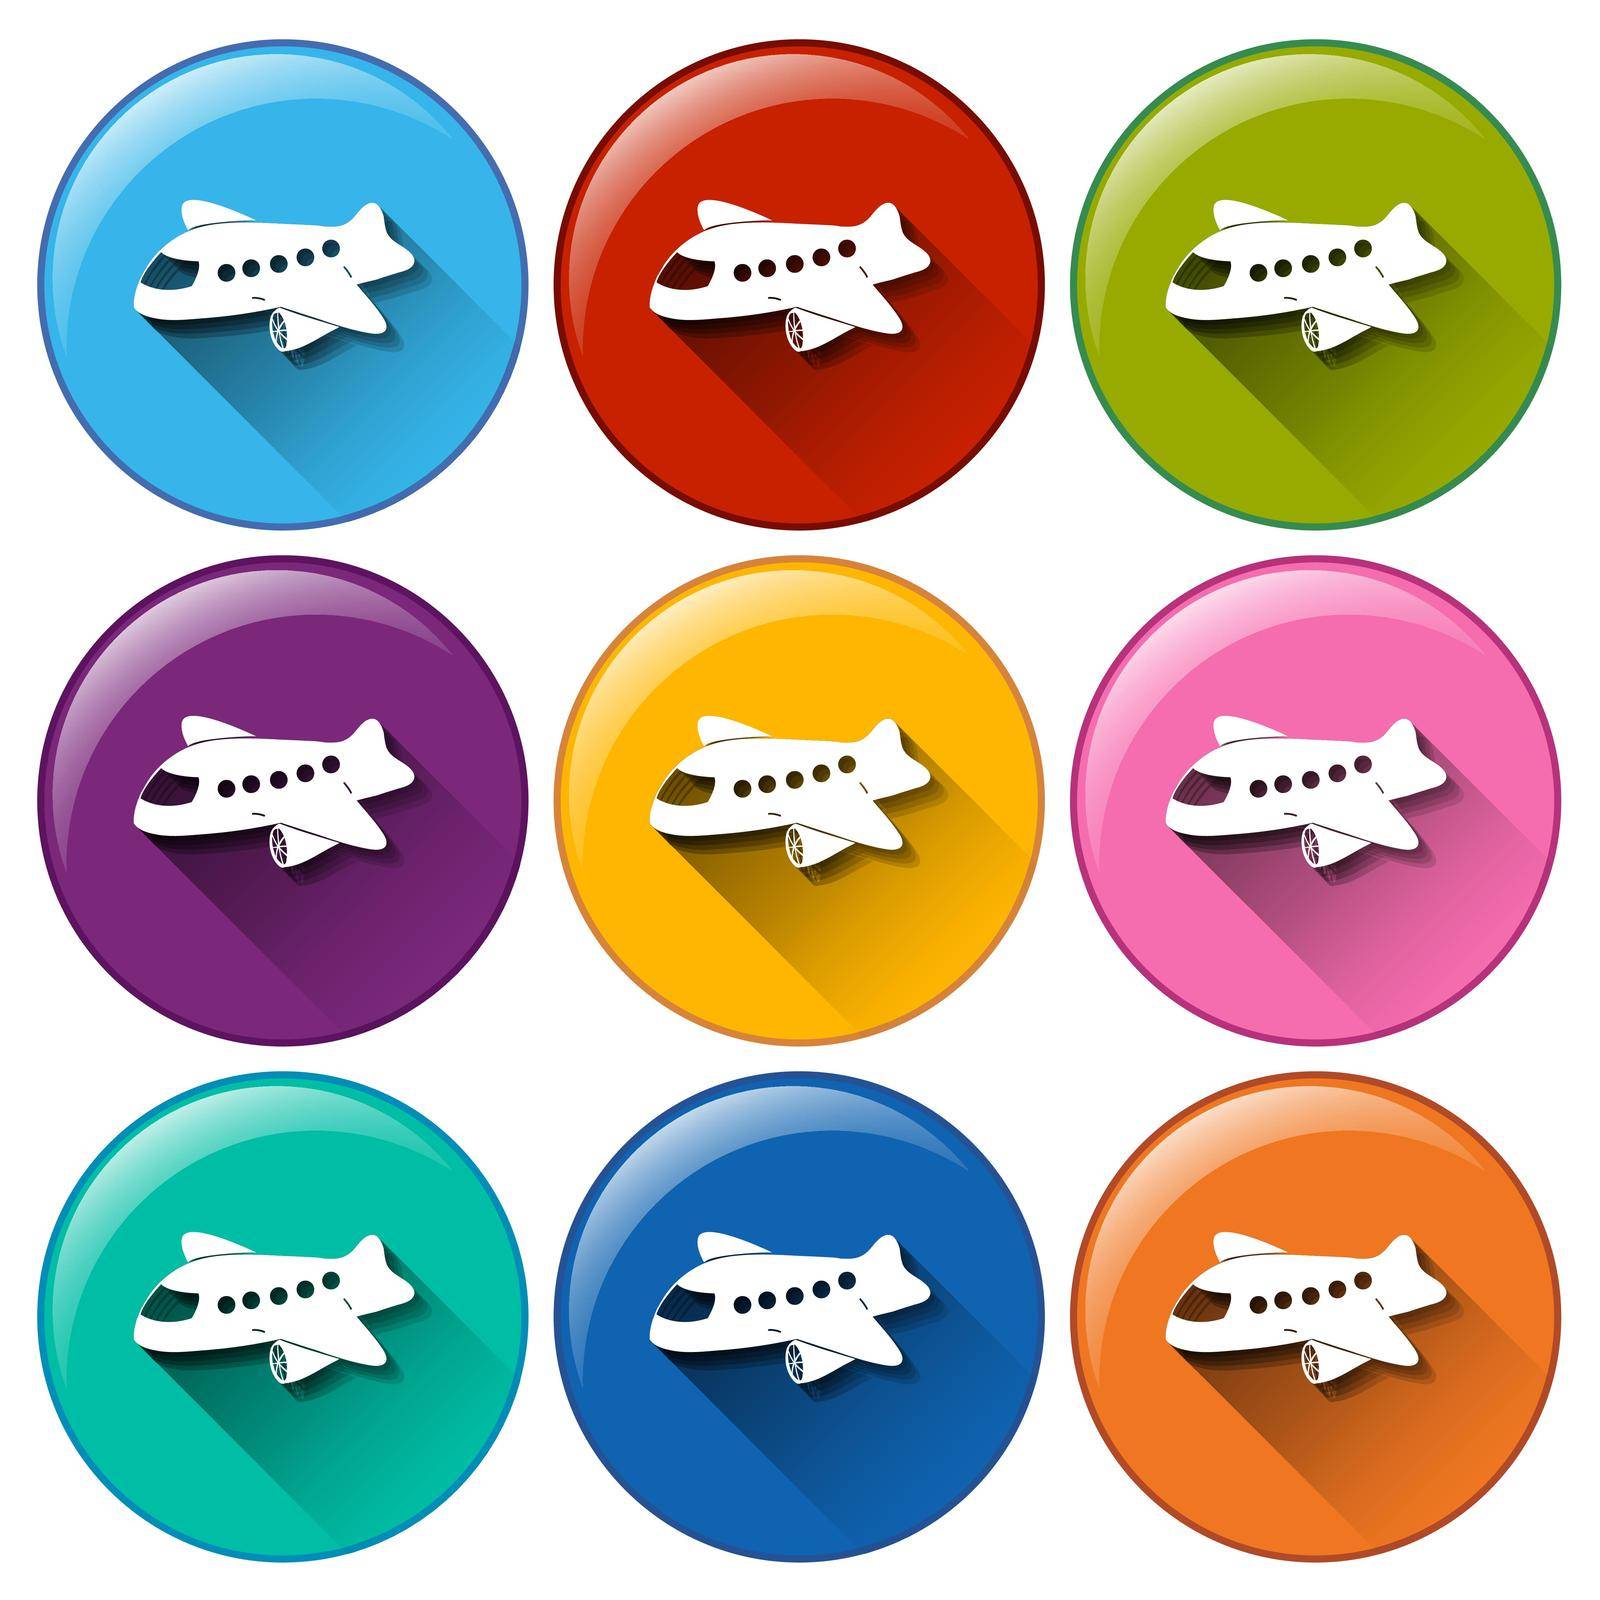 Illustration of many colors airplane icons